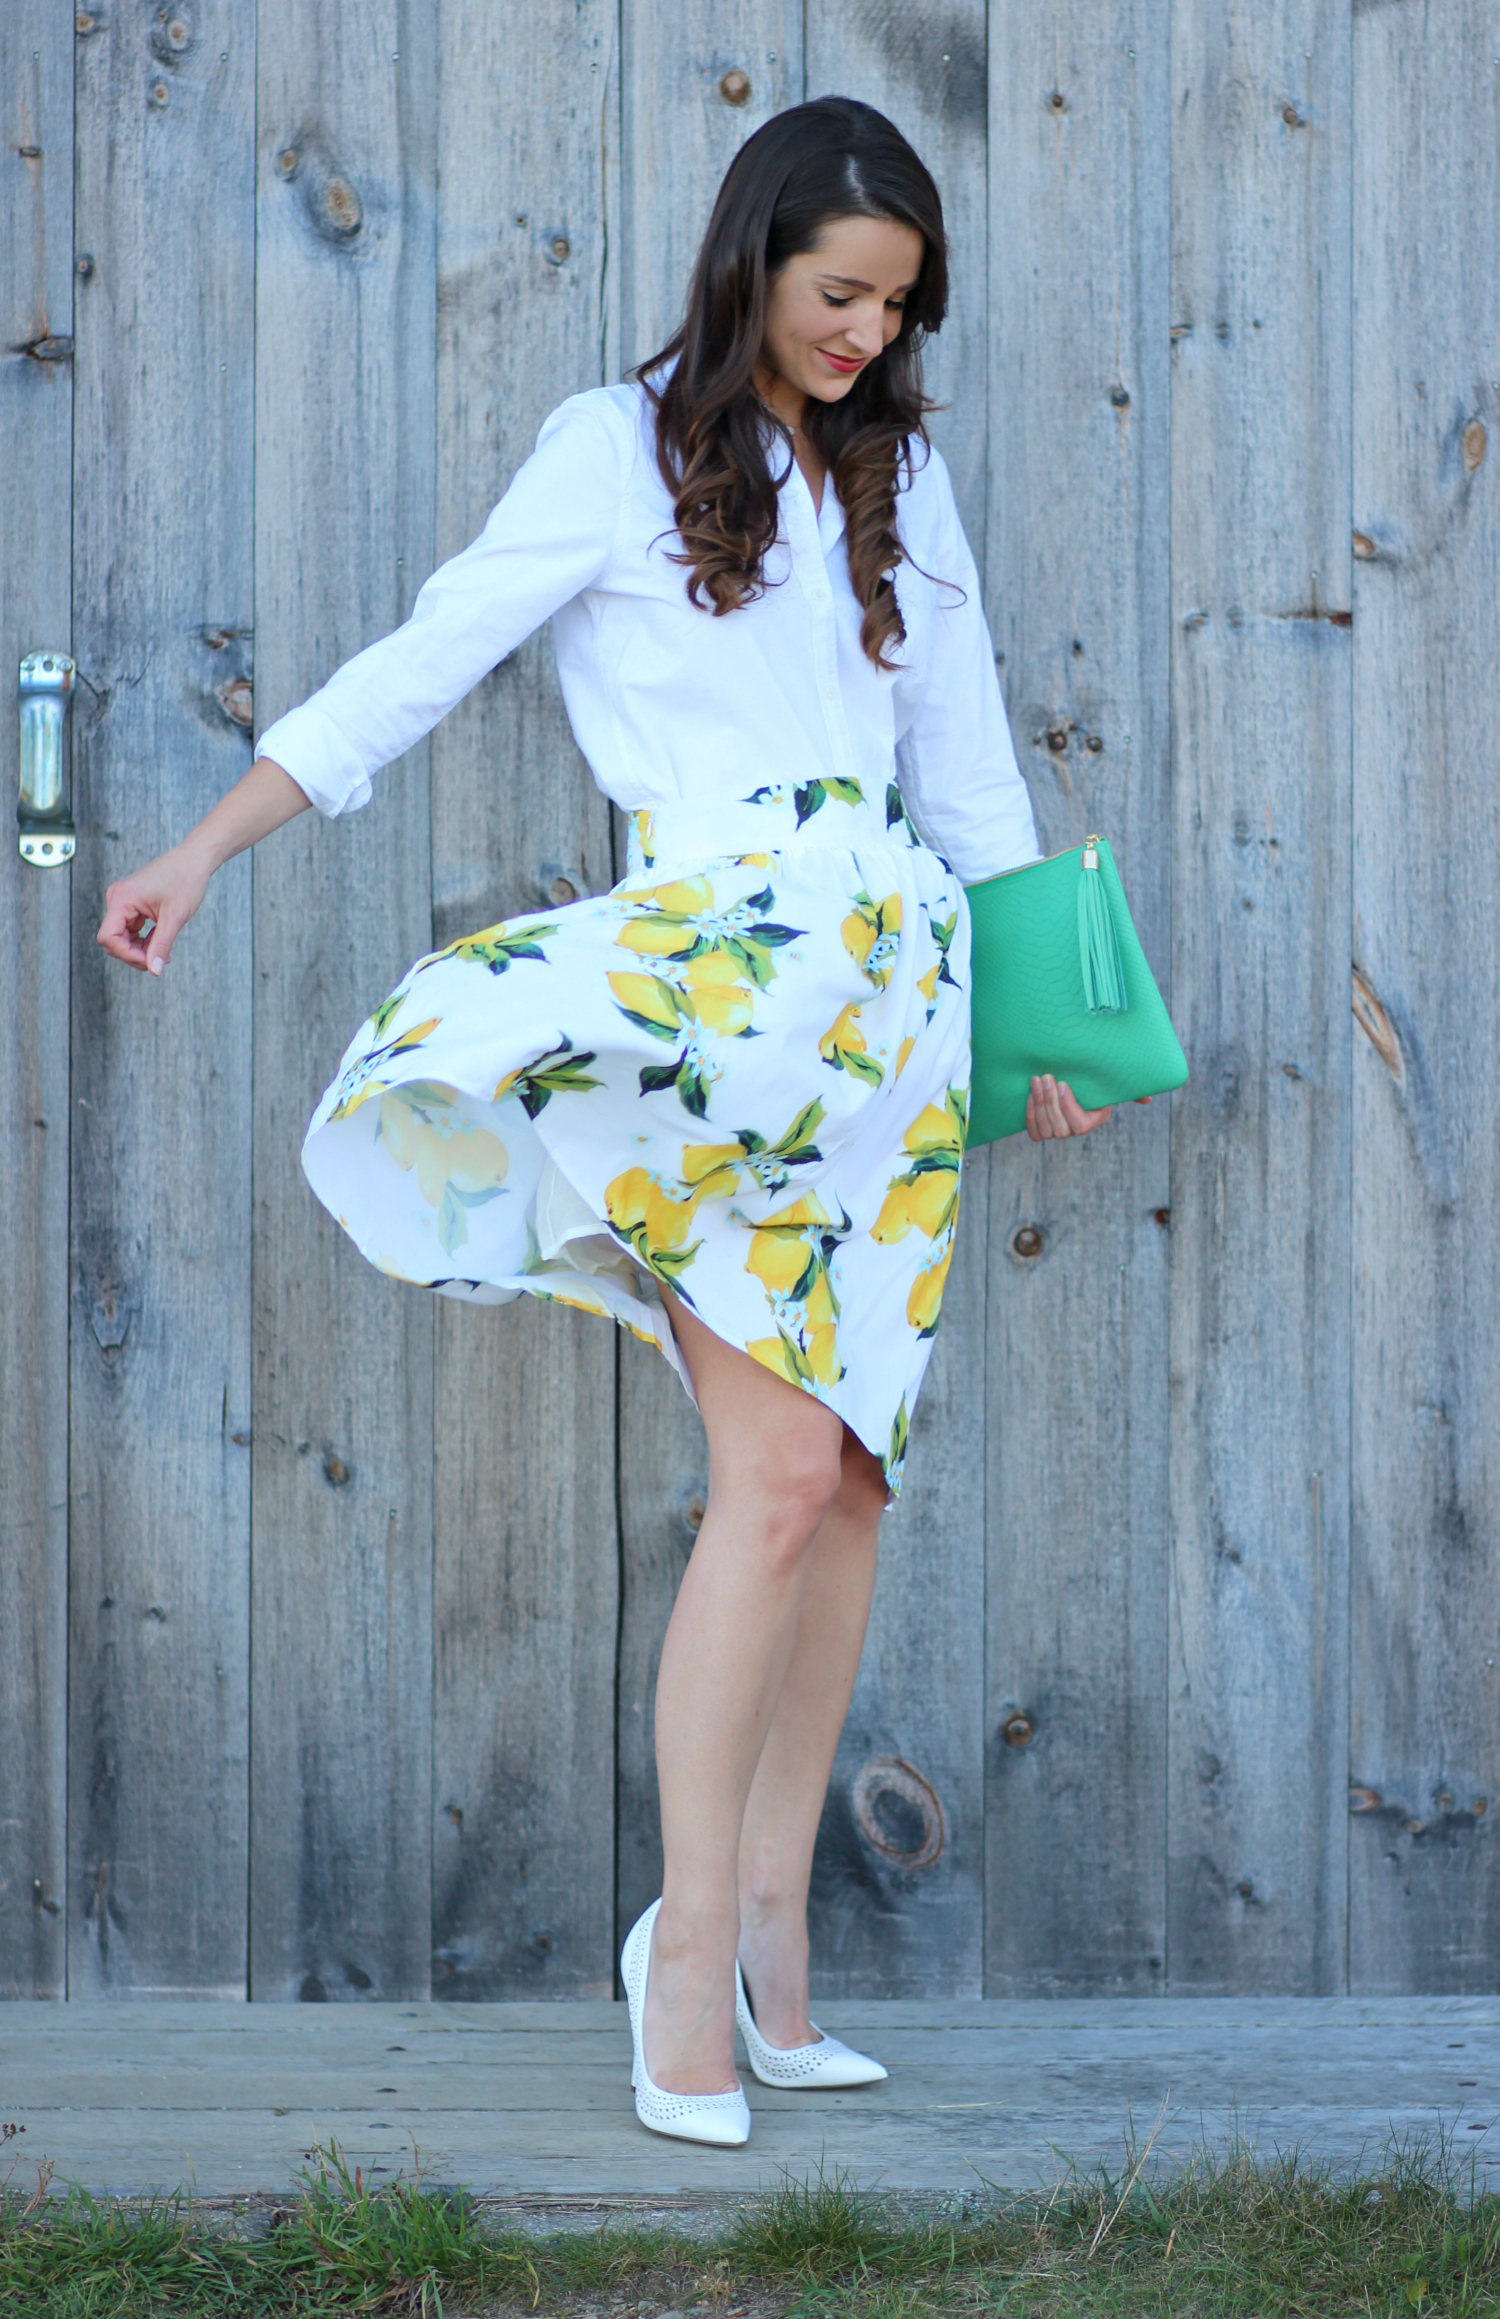 Zaful lemon print skirt with a white J.Crew Factory oxford and kelly green clutch